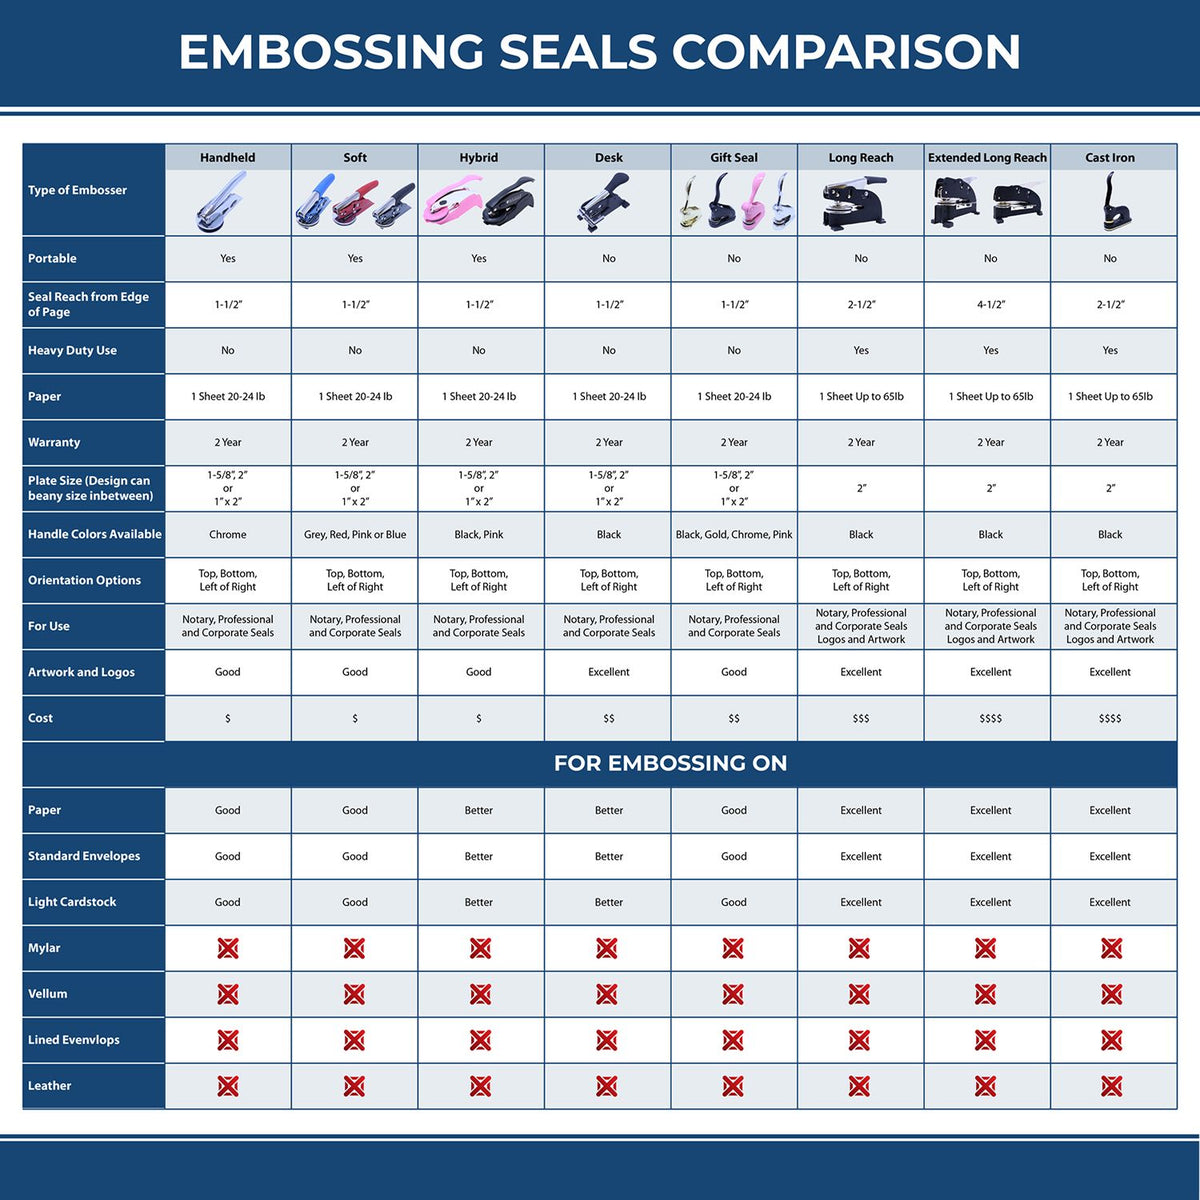 A comparison chart for the different types of mount models available for the Hybrid Minnesota Architect Seal